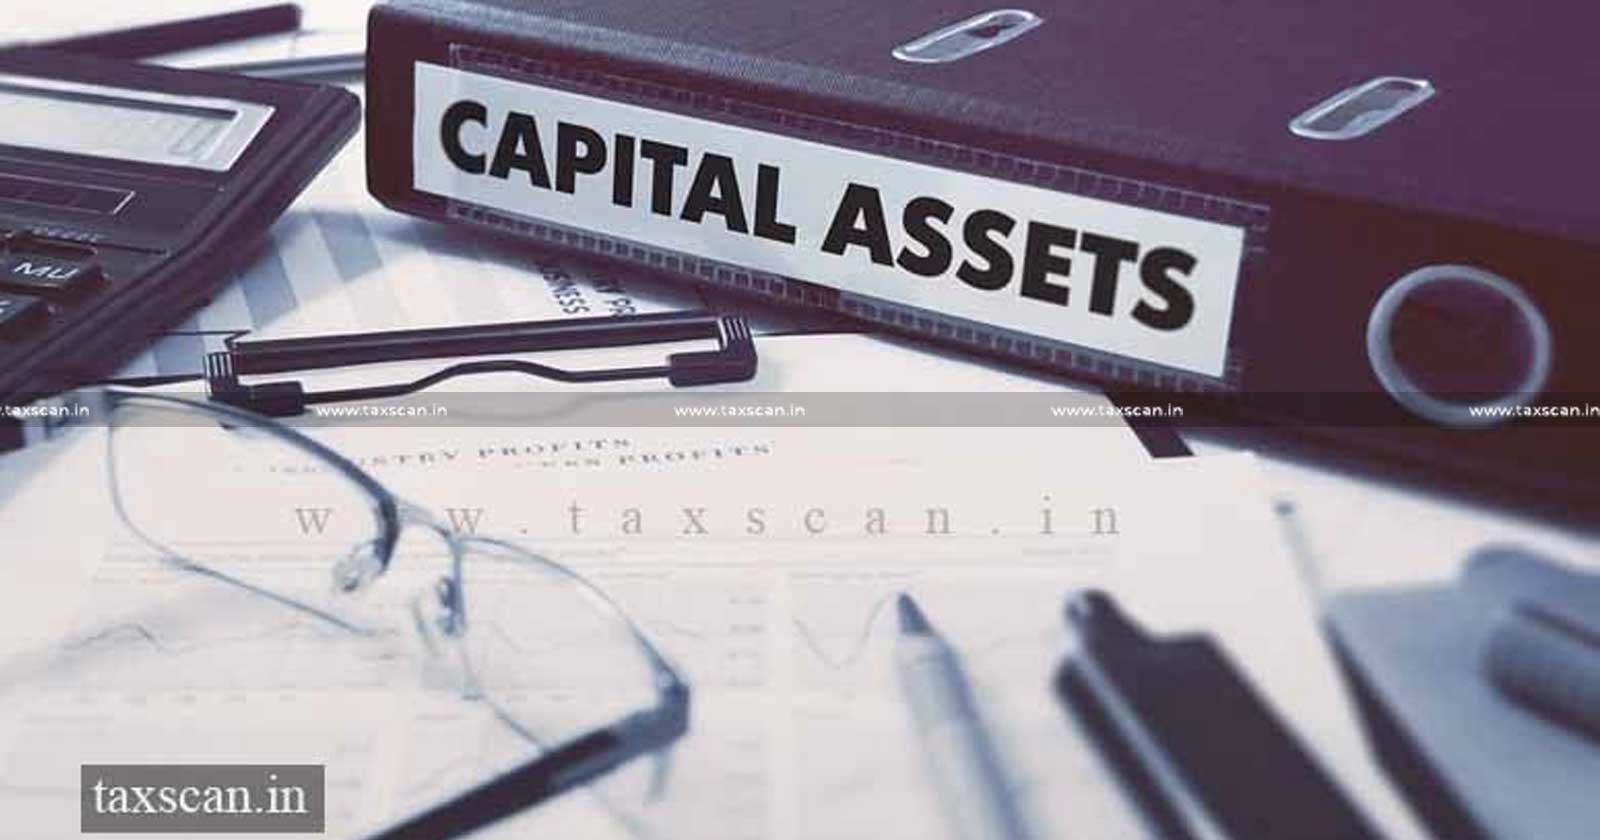 Waiver - Waiver of Loan - Capital Assets - Waiver of Loan for Acquiring Capital Assets - Perquisite - Income Tax Act - taxscan